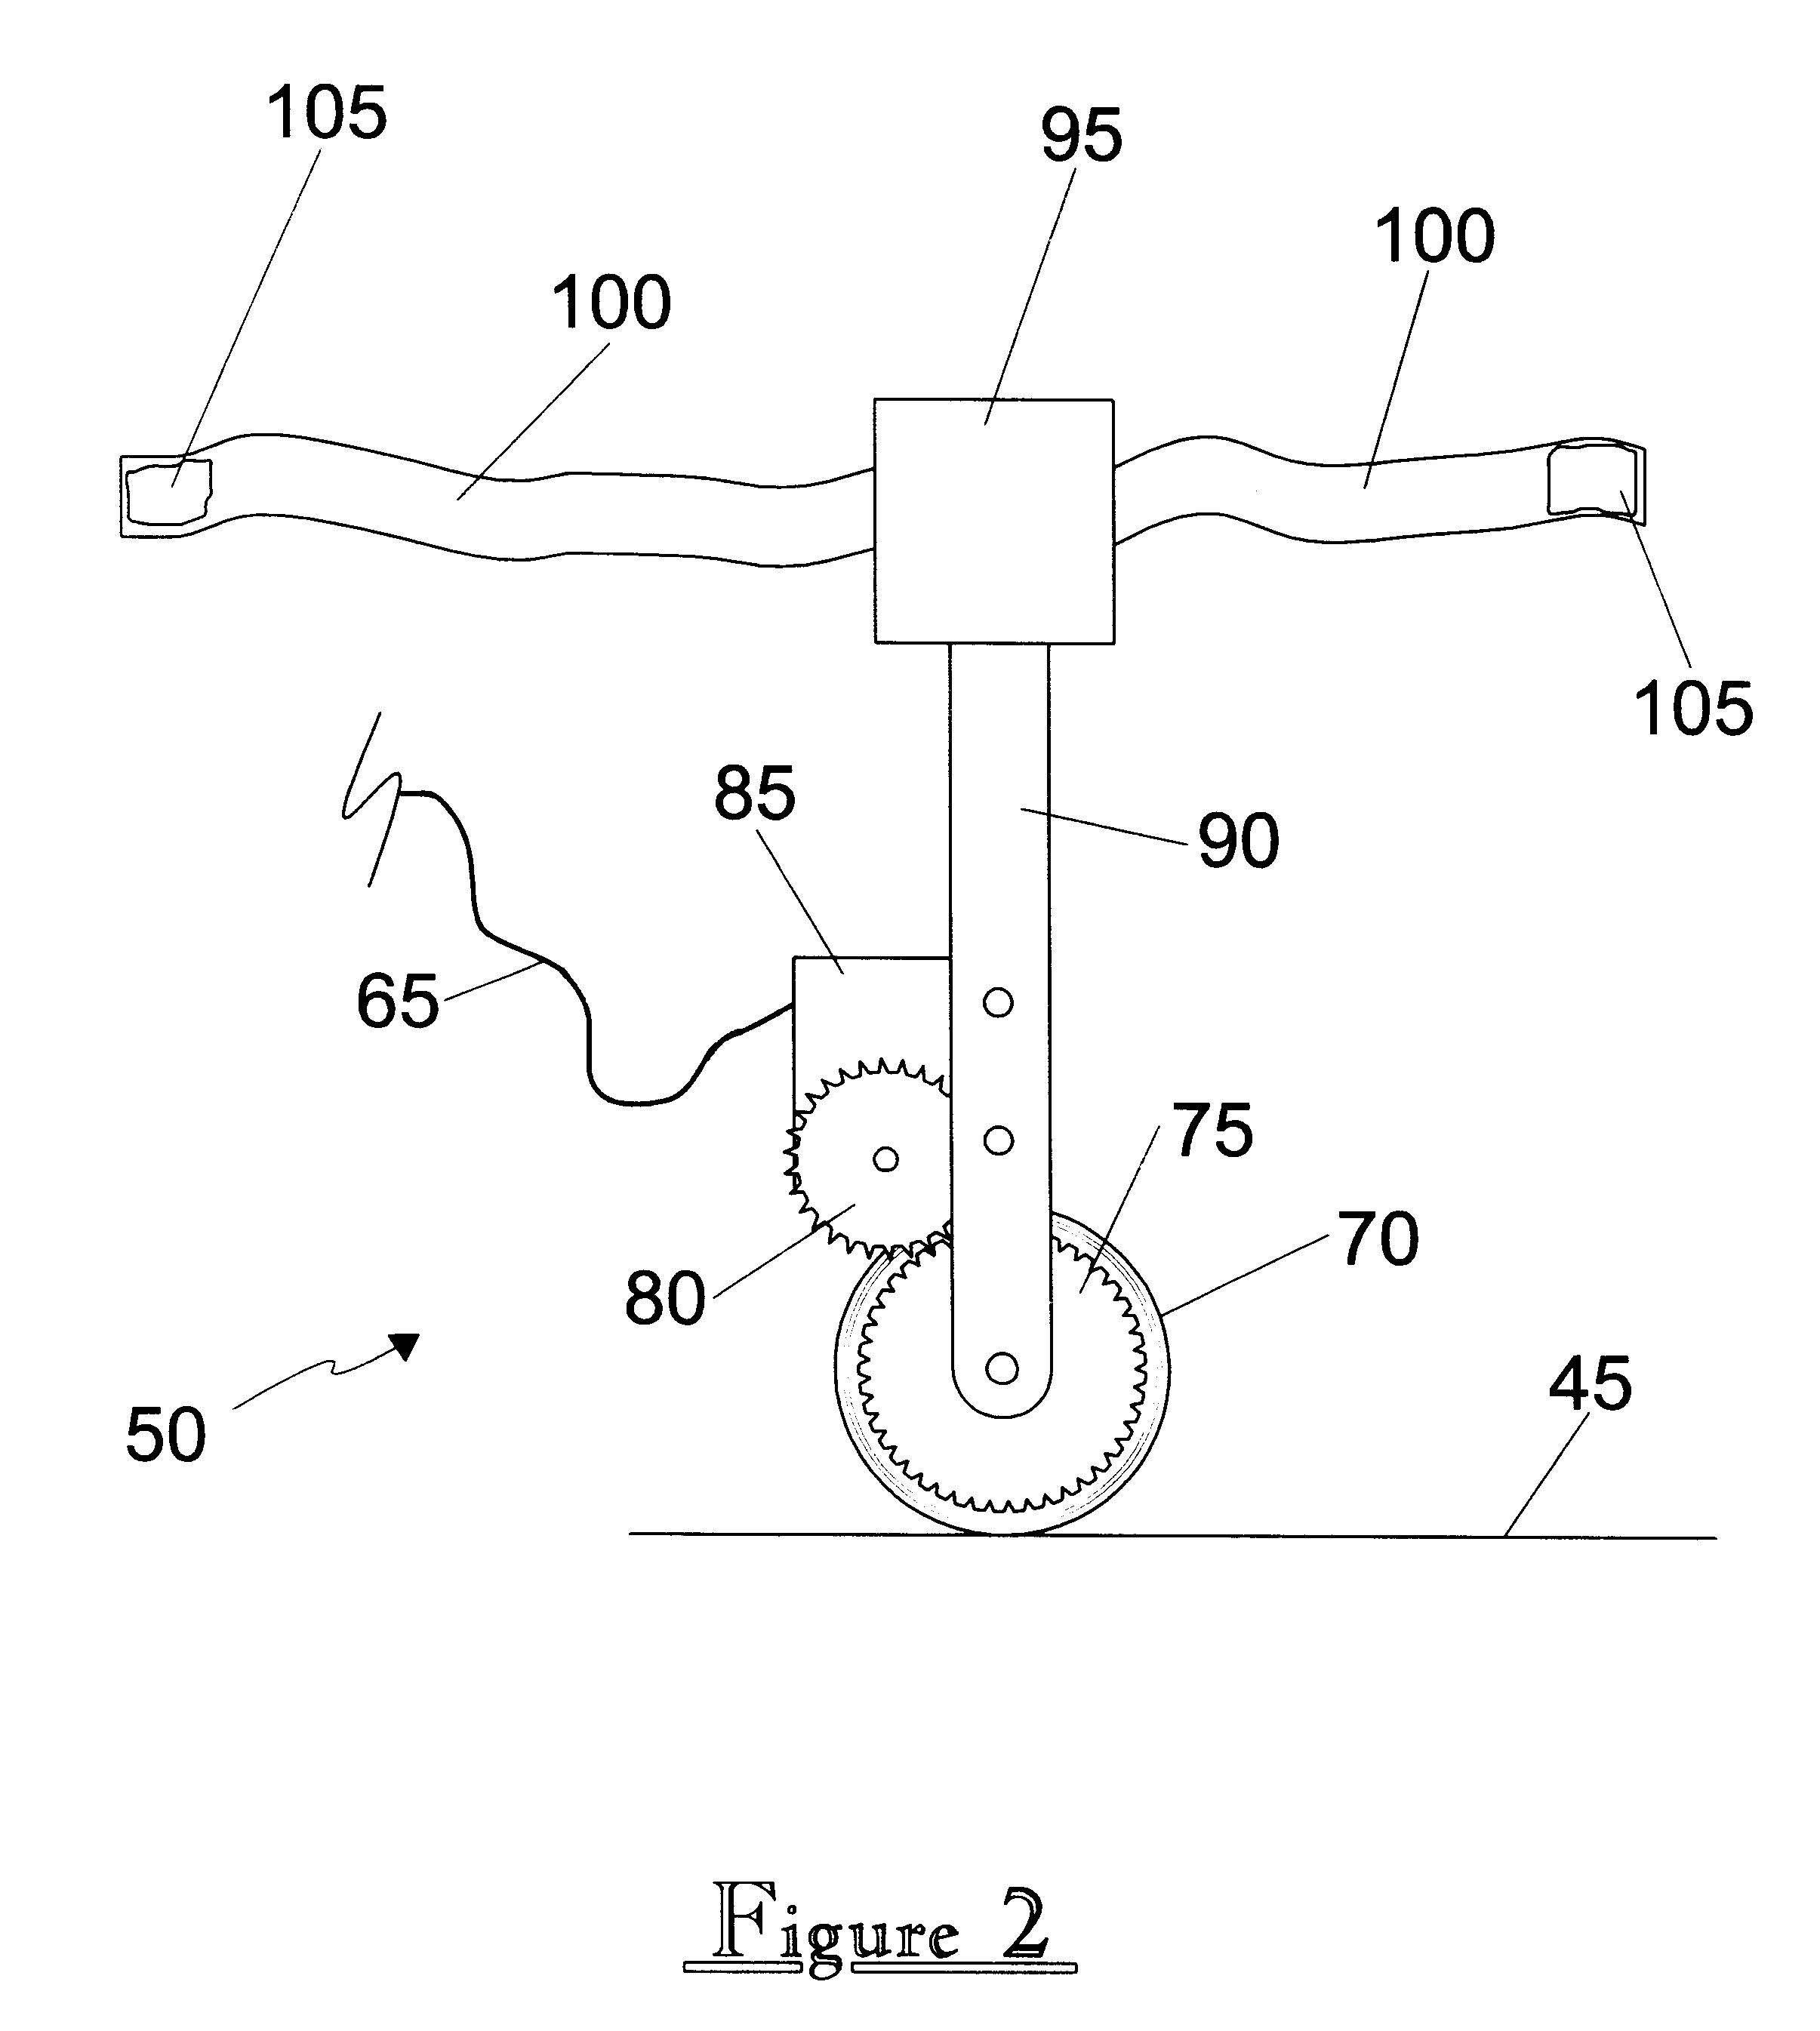 Computer interface with remote communication apparatus for an exercise machine